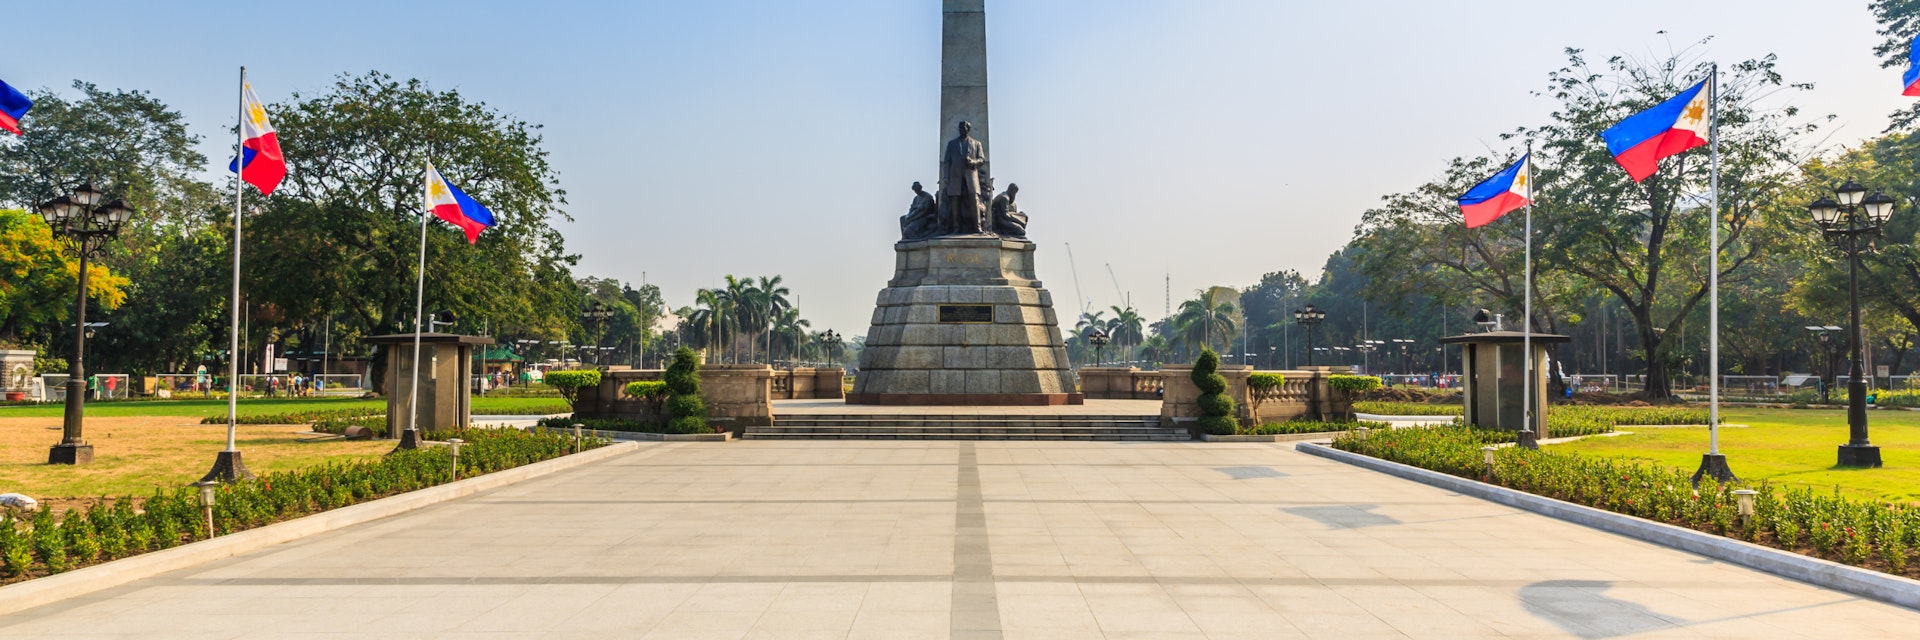 MANILA - FEB 14: Jose Rizal Monument on 14 Feb, 14 in Manila. The monument dedicated for Jose Rezal, he is widely considered the greatest national hero of the Philippines.; Shutterstock ID 181608902; Your name (First / Last): Josh Vogel; GL account no.: 56530; Netsuite department name: Online Design; Full Product or Project name including edition: Digital Content/Sights